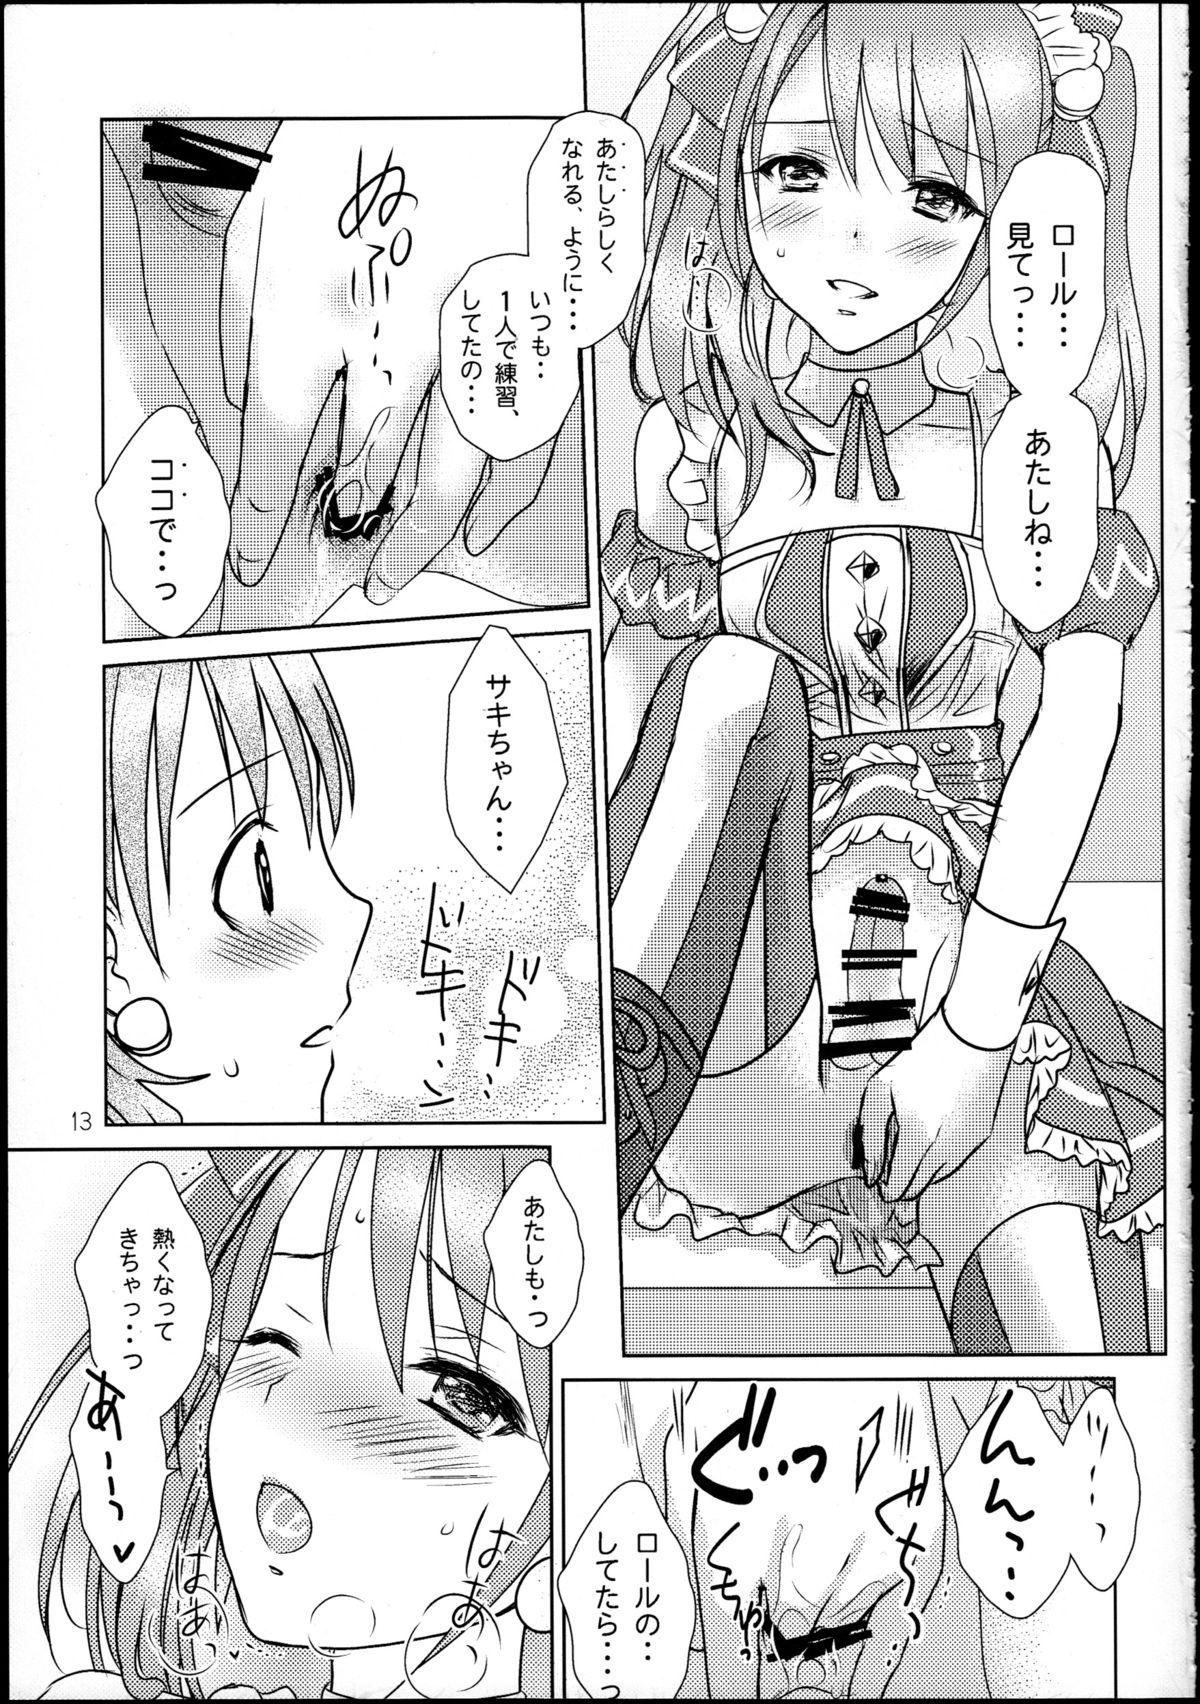 Classic You're my special sweetest cake! - The idolmaster British - Page 12